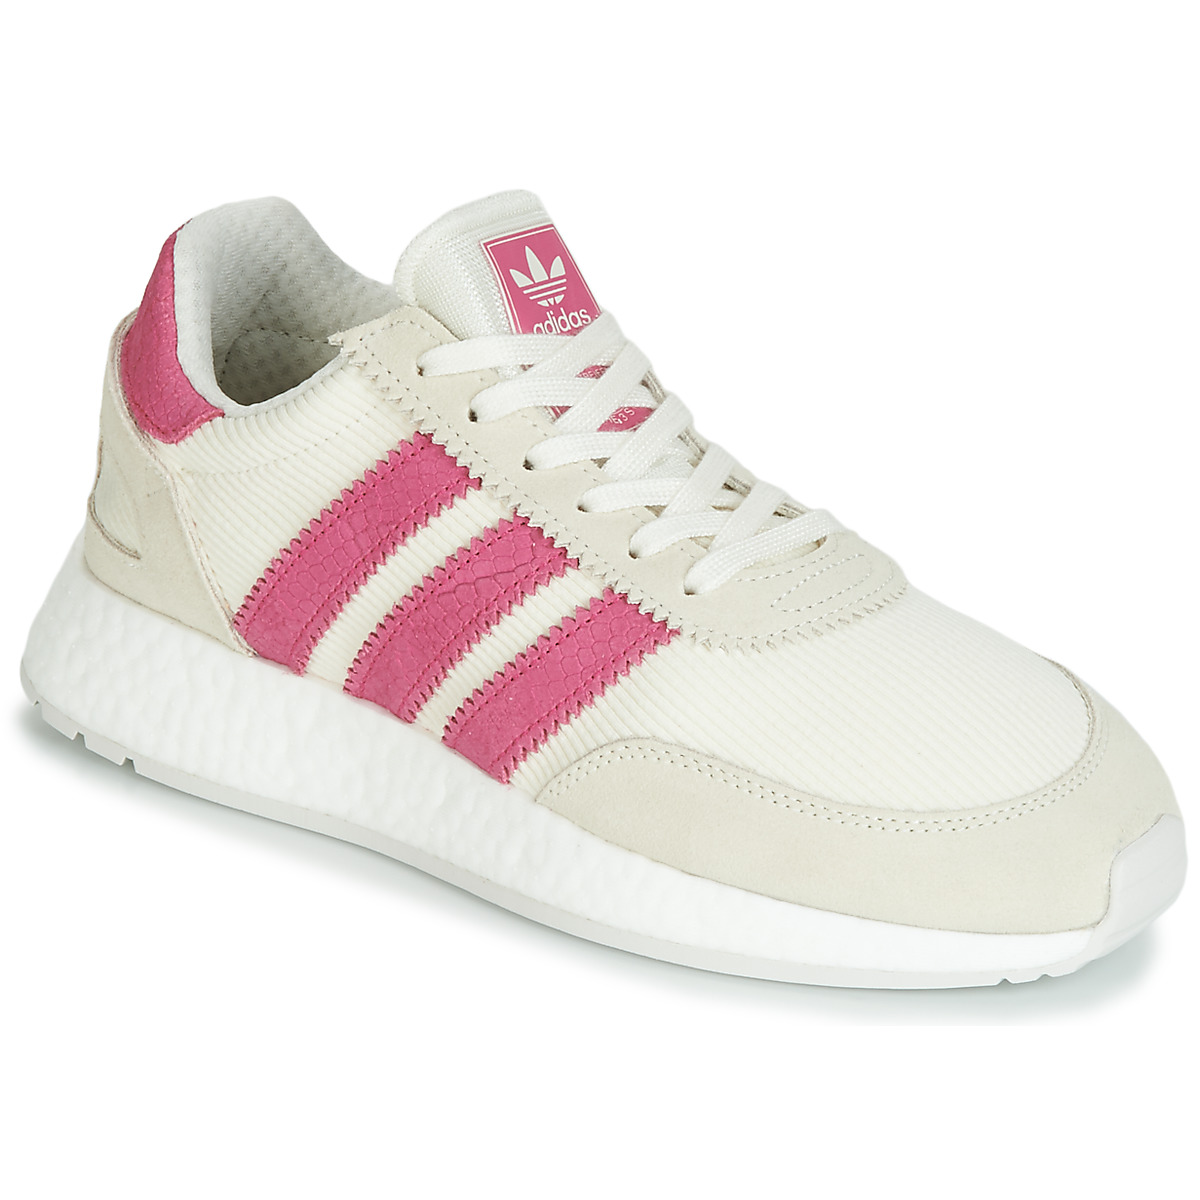 Xαμηλά Sneakers adidas I-5923 W